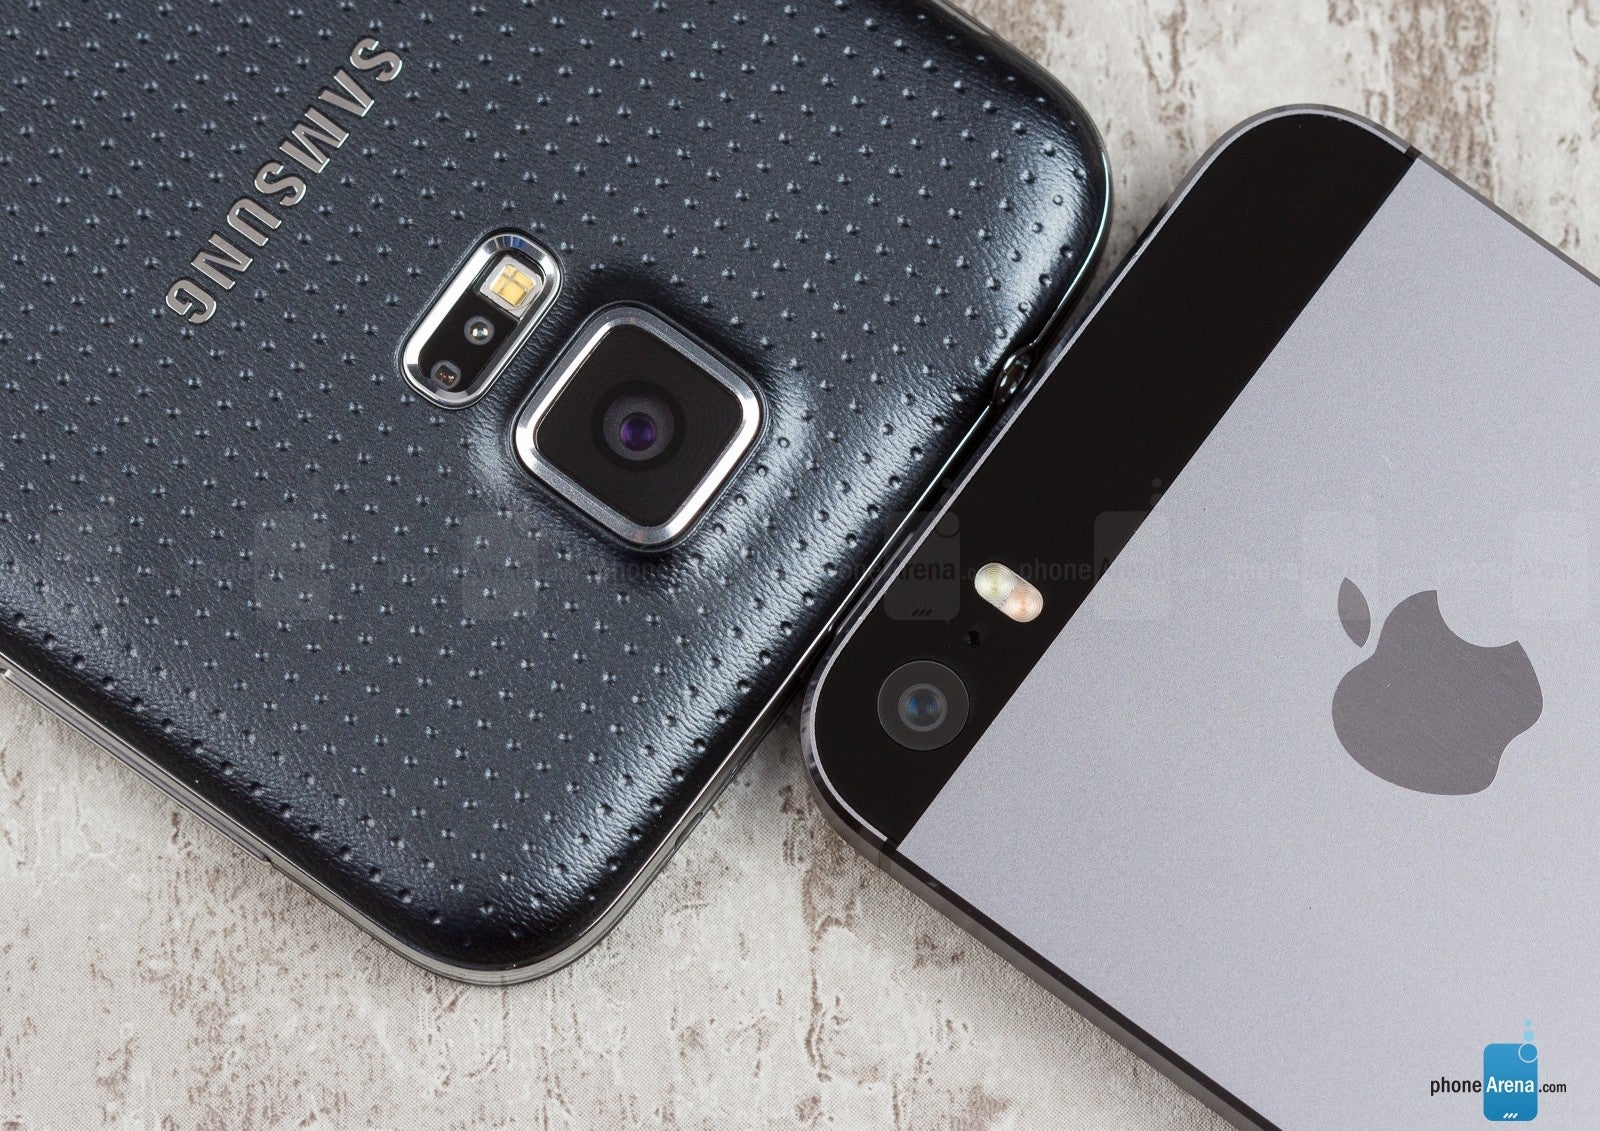 Lots of British users are upgrading to Samsung's Galaxy S5 from an iPhone, says report